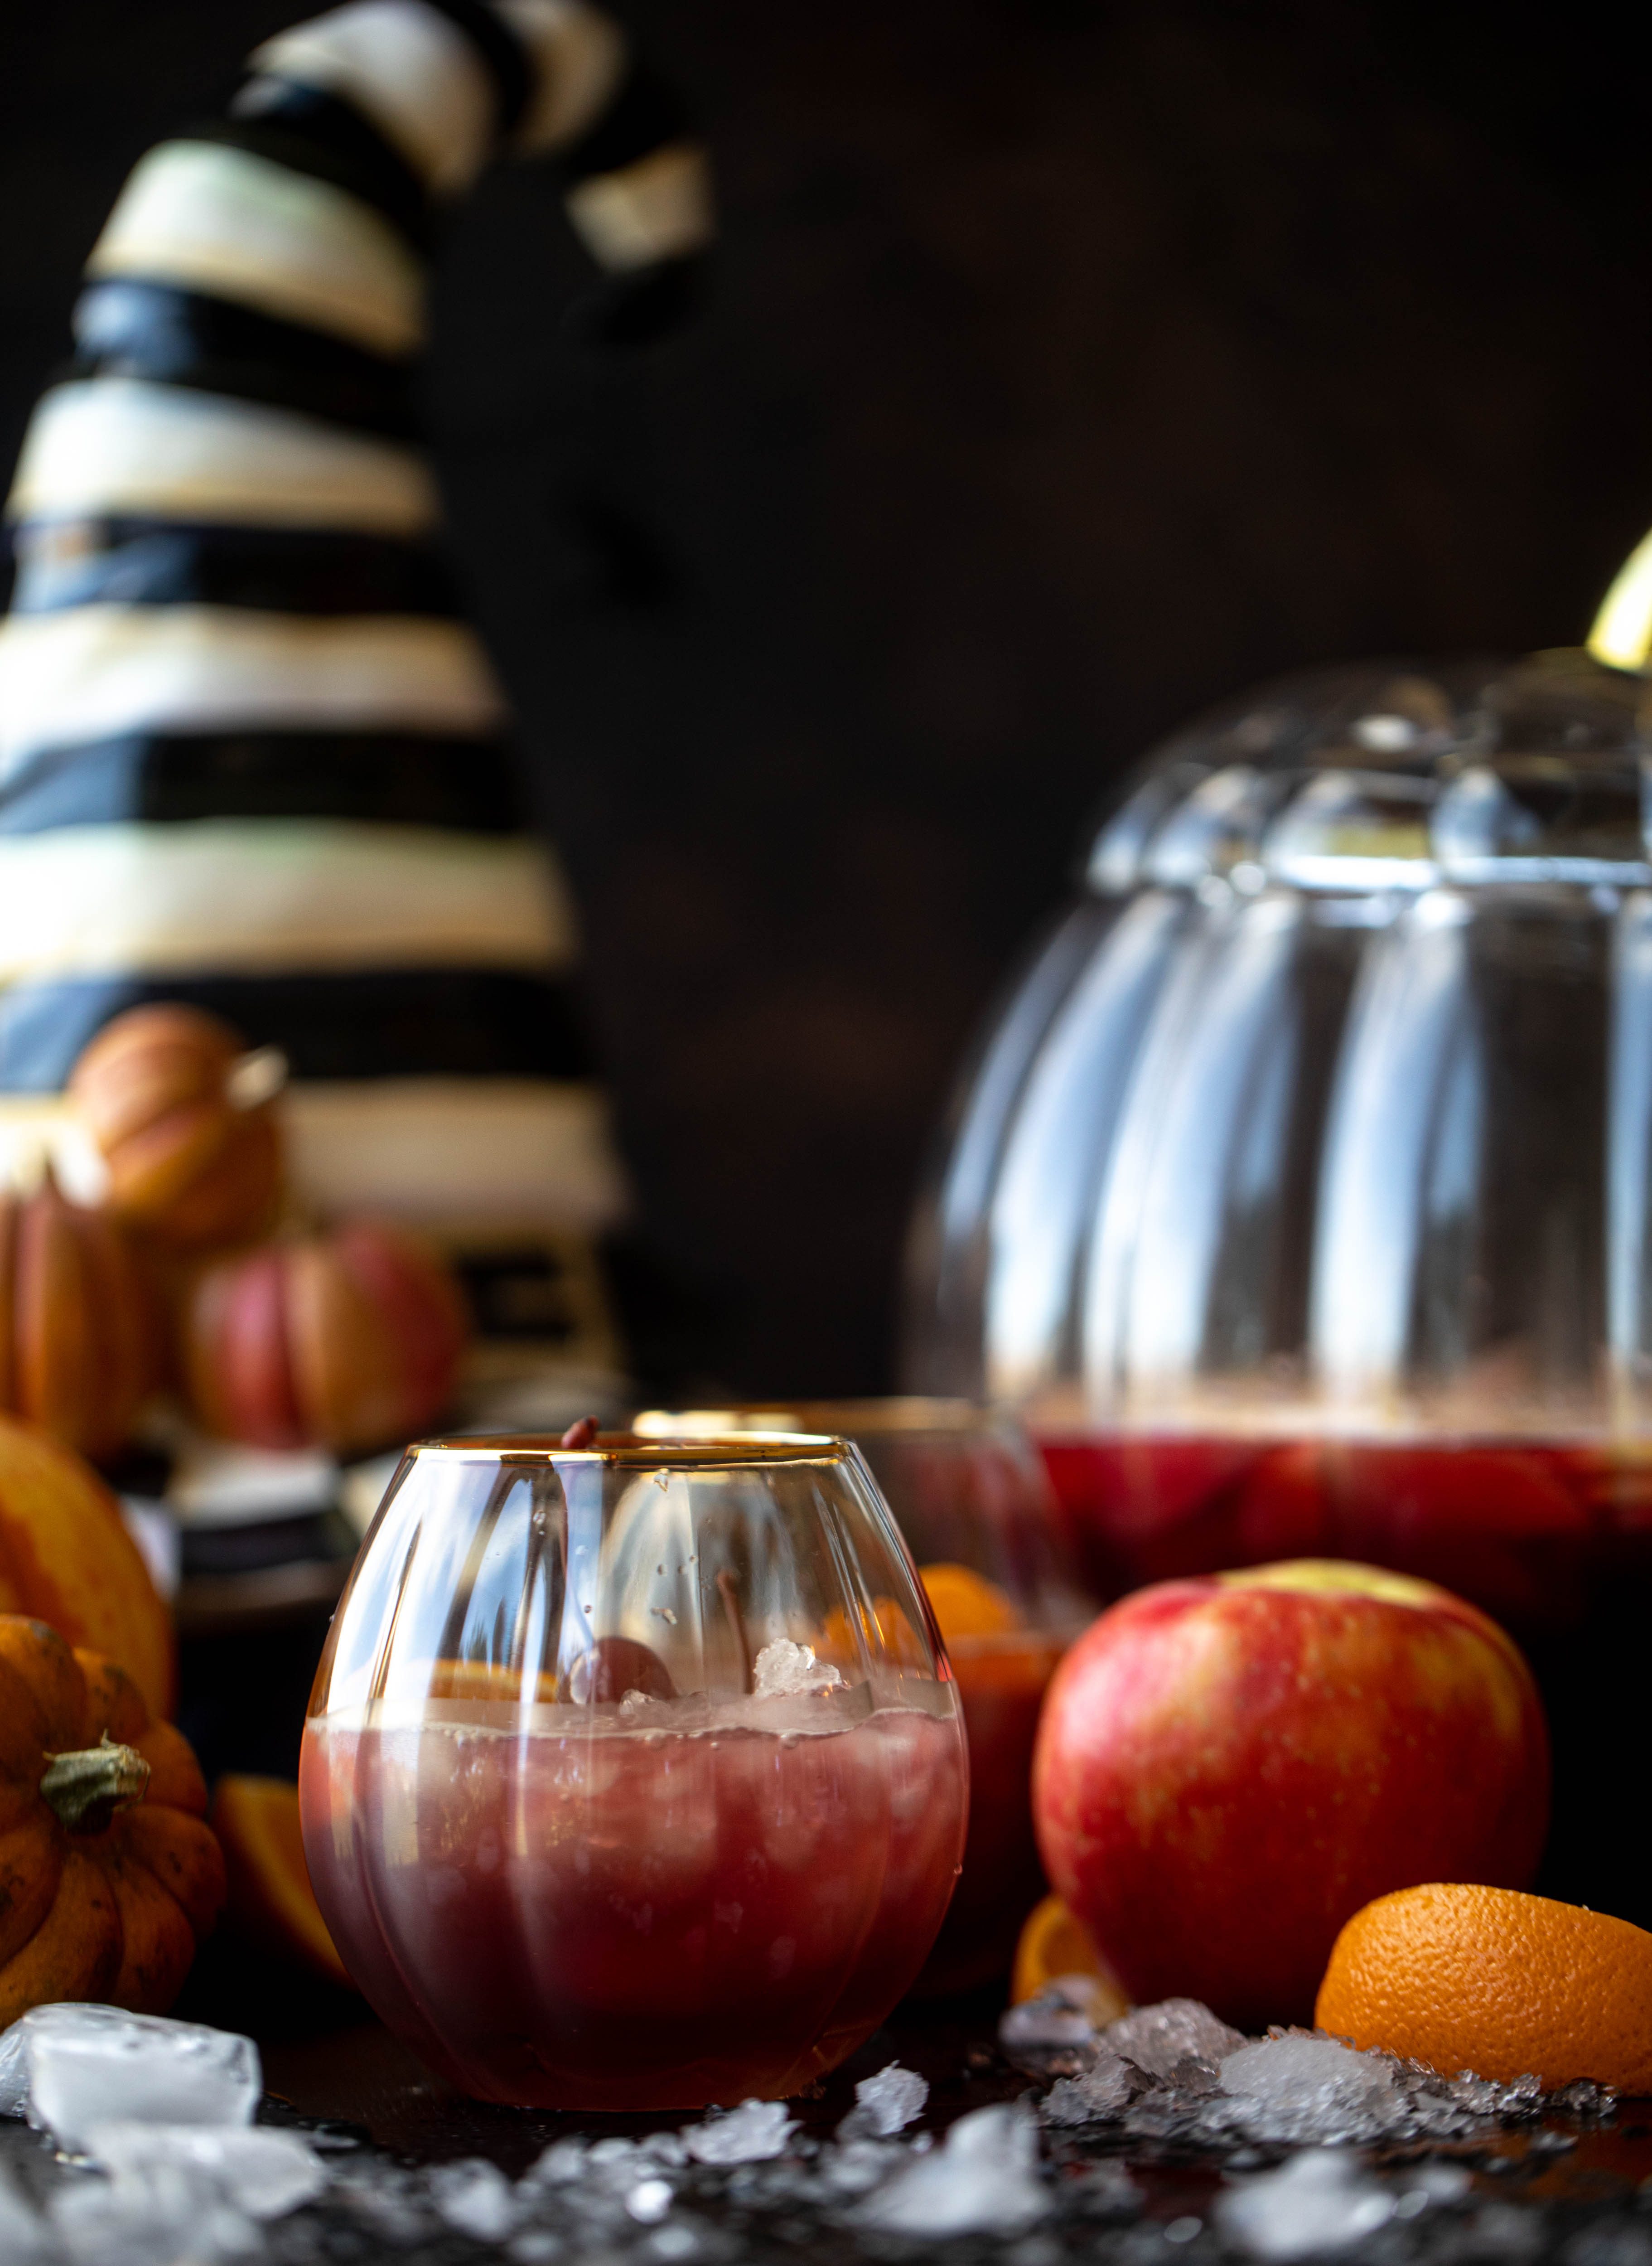 A fun Halloween punch that everyone can enjoy! Hocus pocus punch is full of cider, orange and cranberry and tastes delicious!